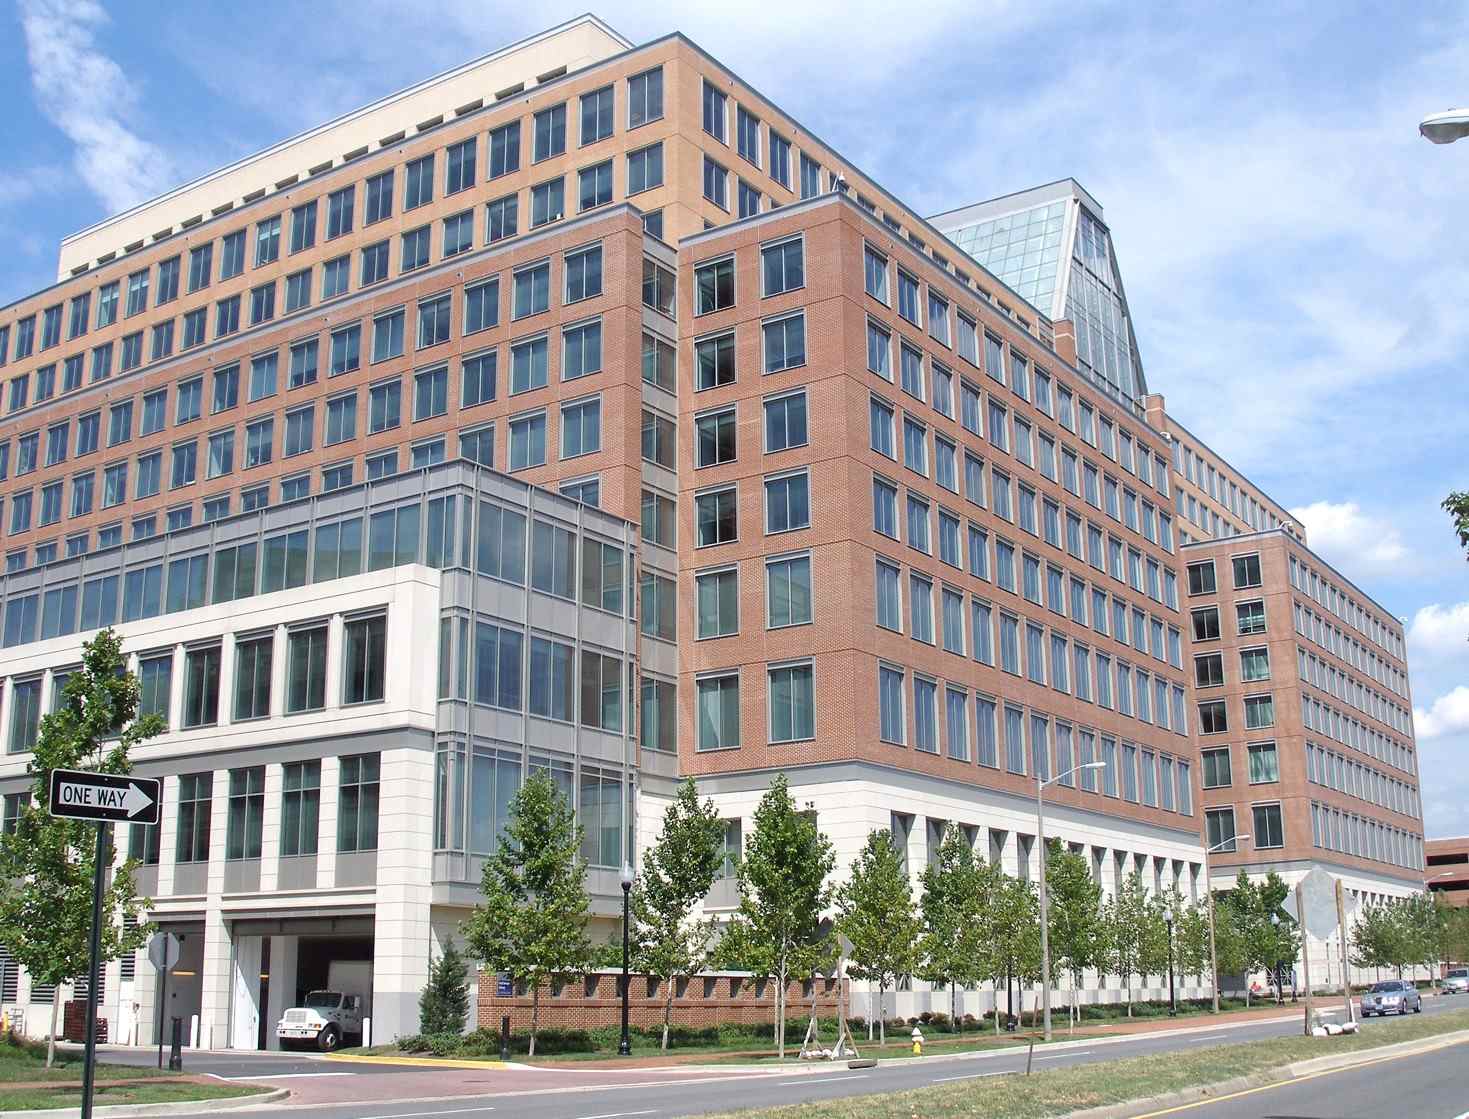 Patent and trademark office